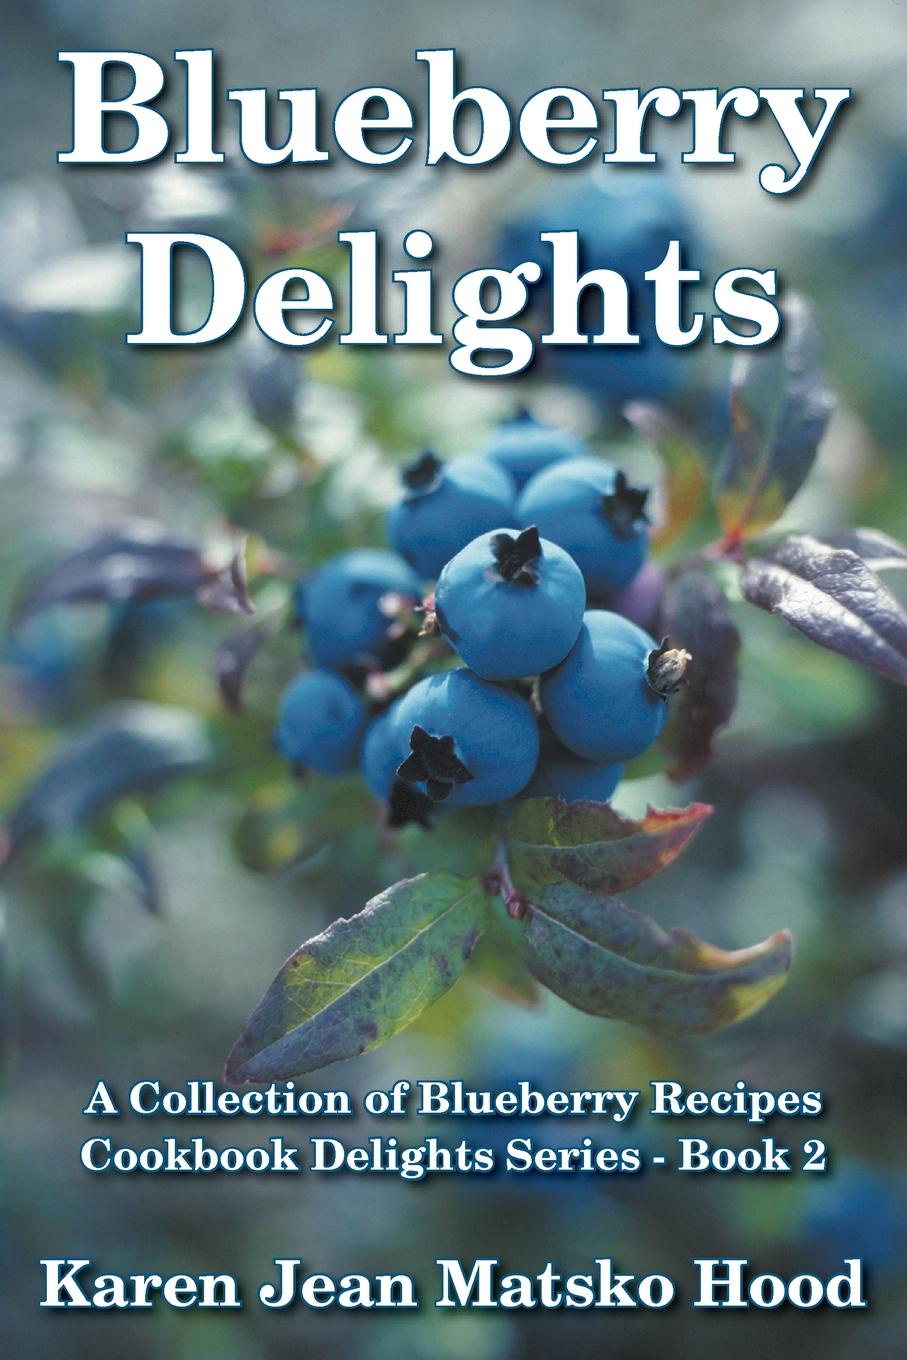 Blueberry Delights Cookbook. A Collection of Blueberry Recipes